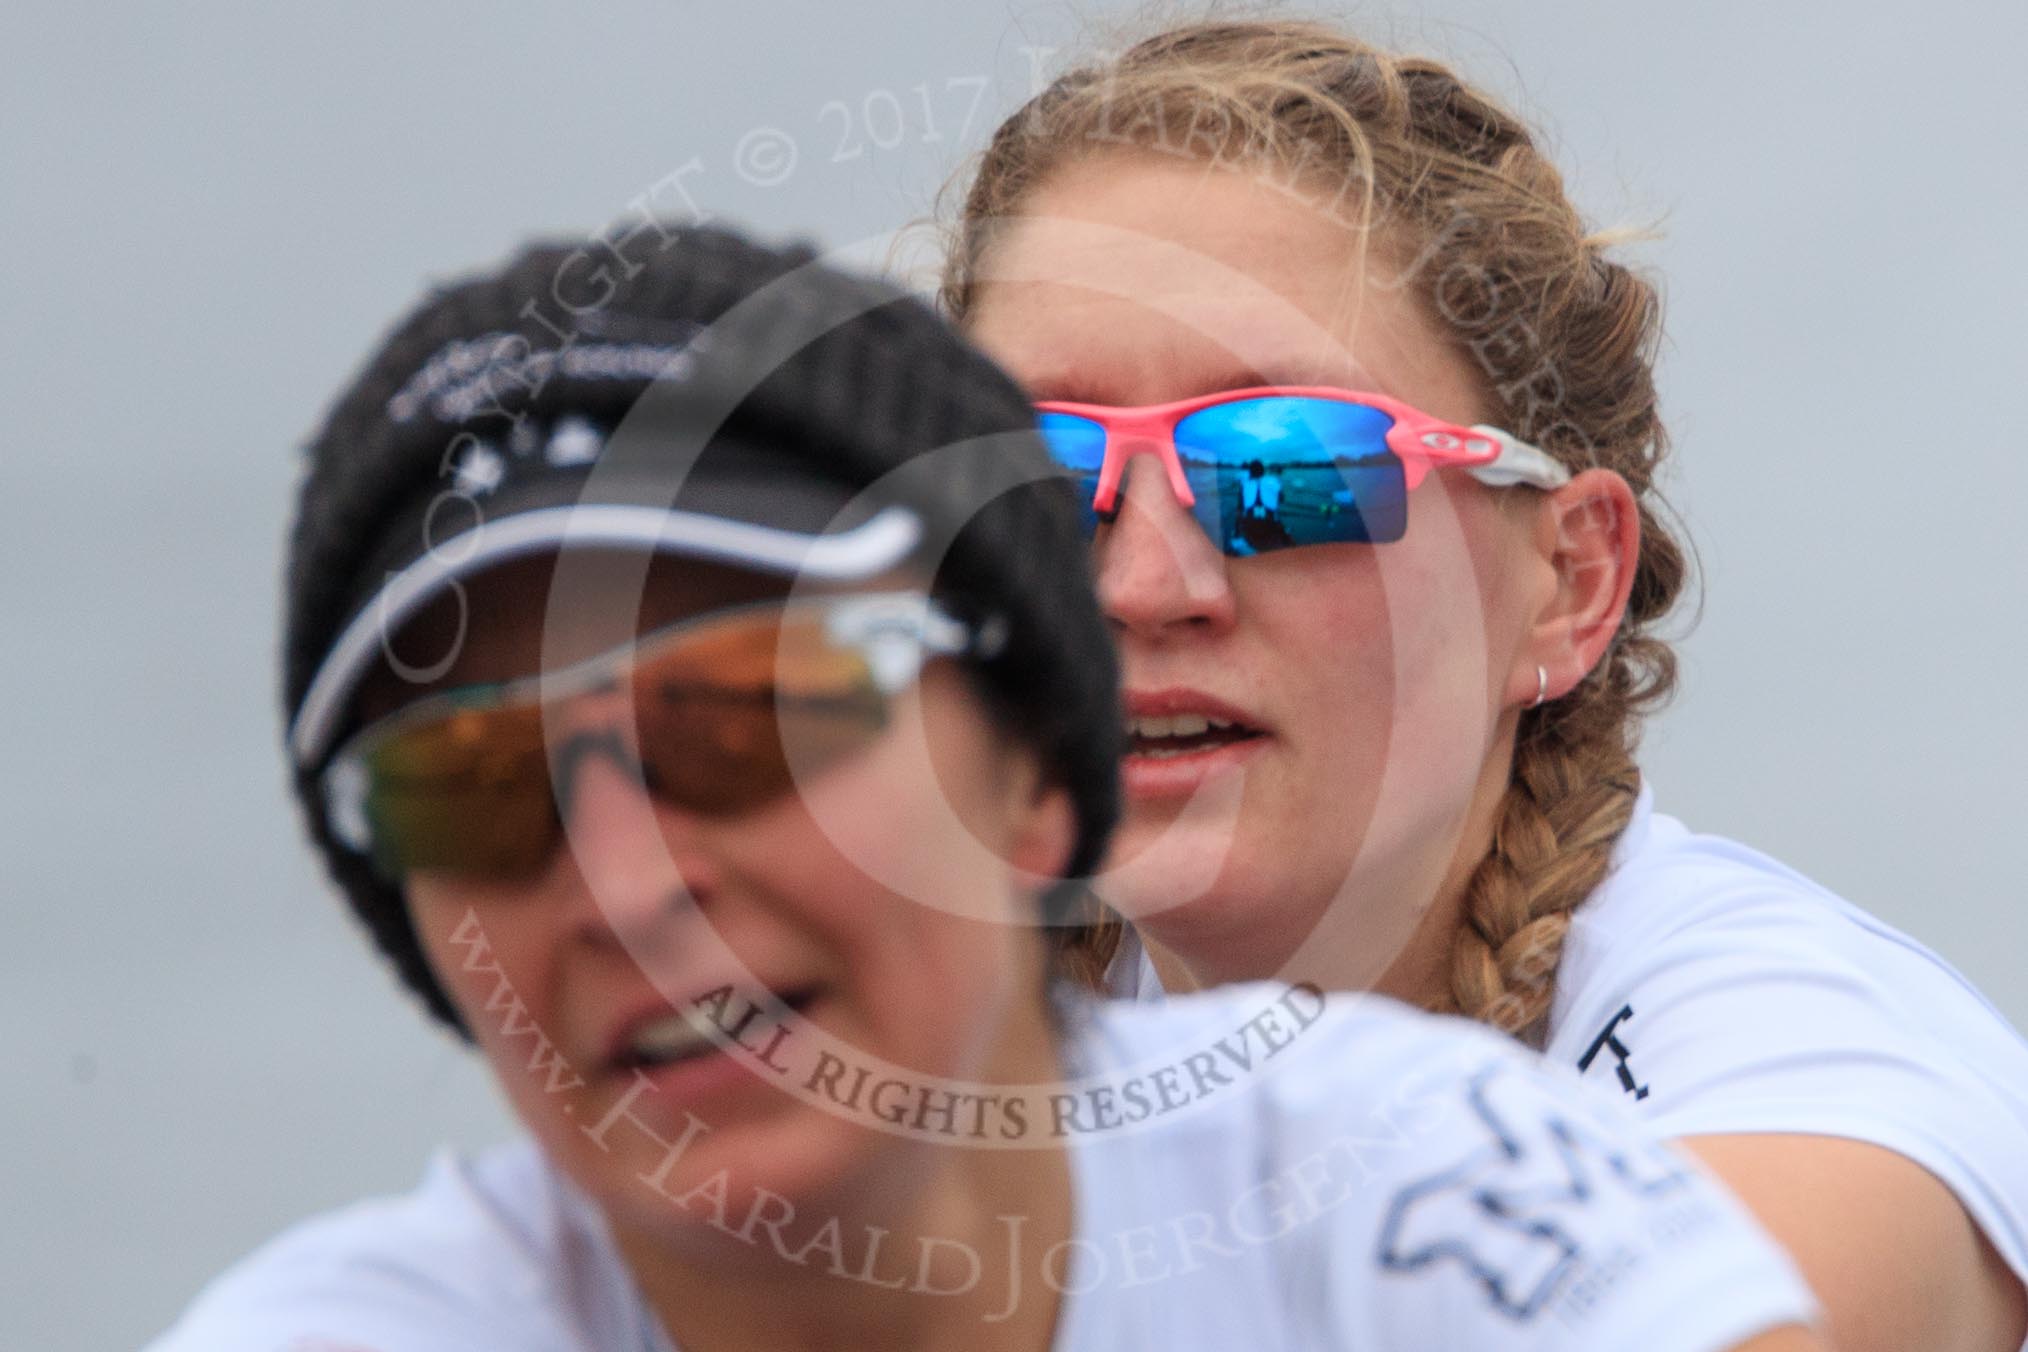 The Women's Boat Race season 2018 - fixture OUWBC vs. Molesey BC: Molesey's 3 seat Gabby Rodriguez and  2 Lucy Primmer, with the boat mirrored in her sunglasses.
River Thames between Putney Bridge and Mortlake,
London SW15,

United Kingdom,
on 04 March 2018 at 13:49, image #73